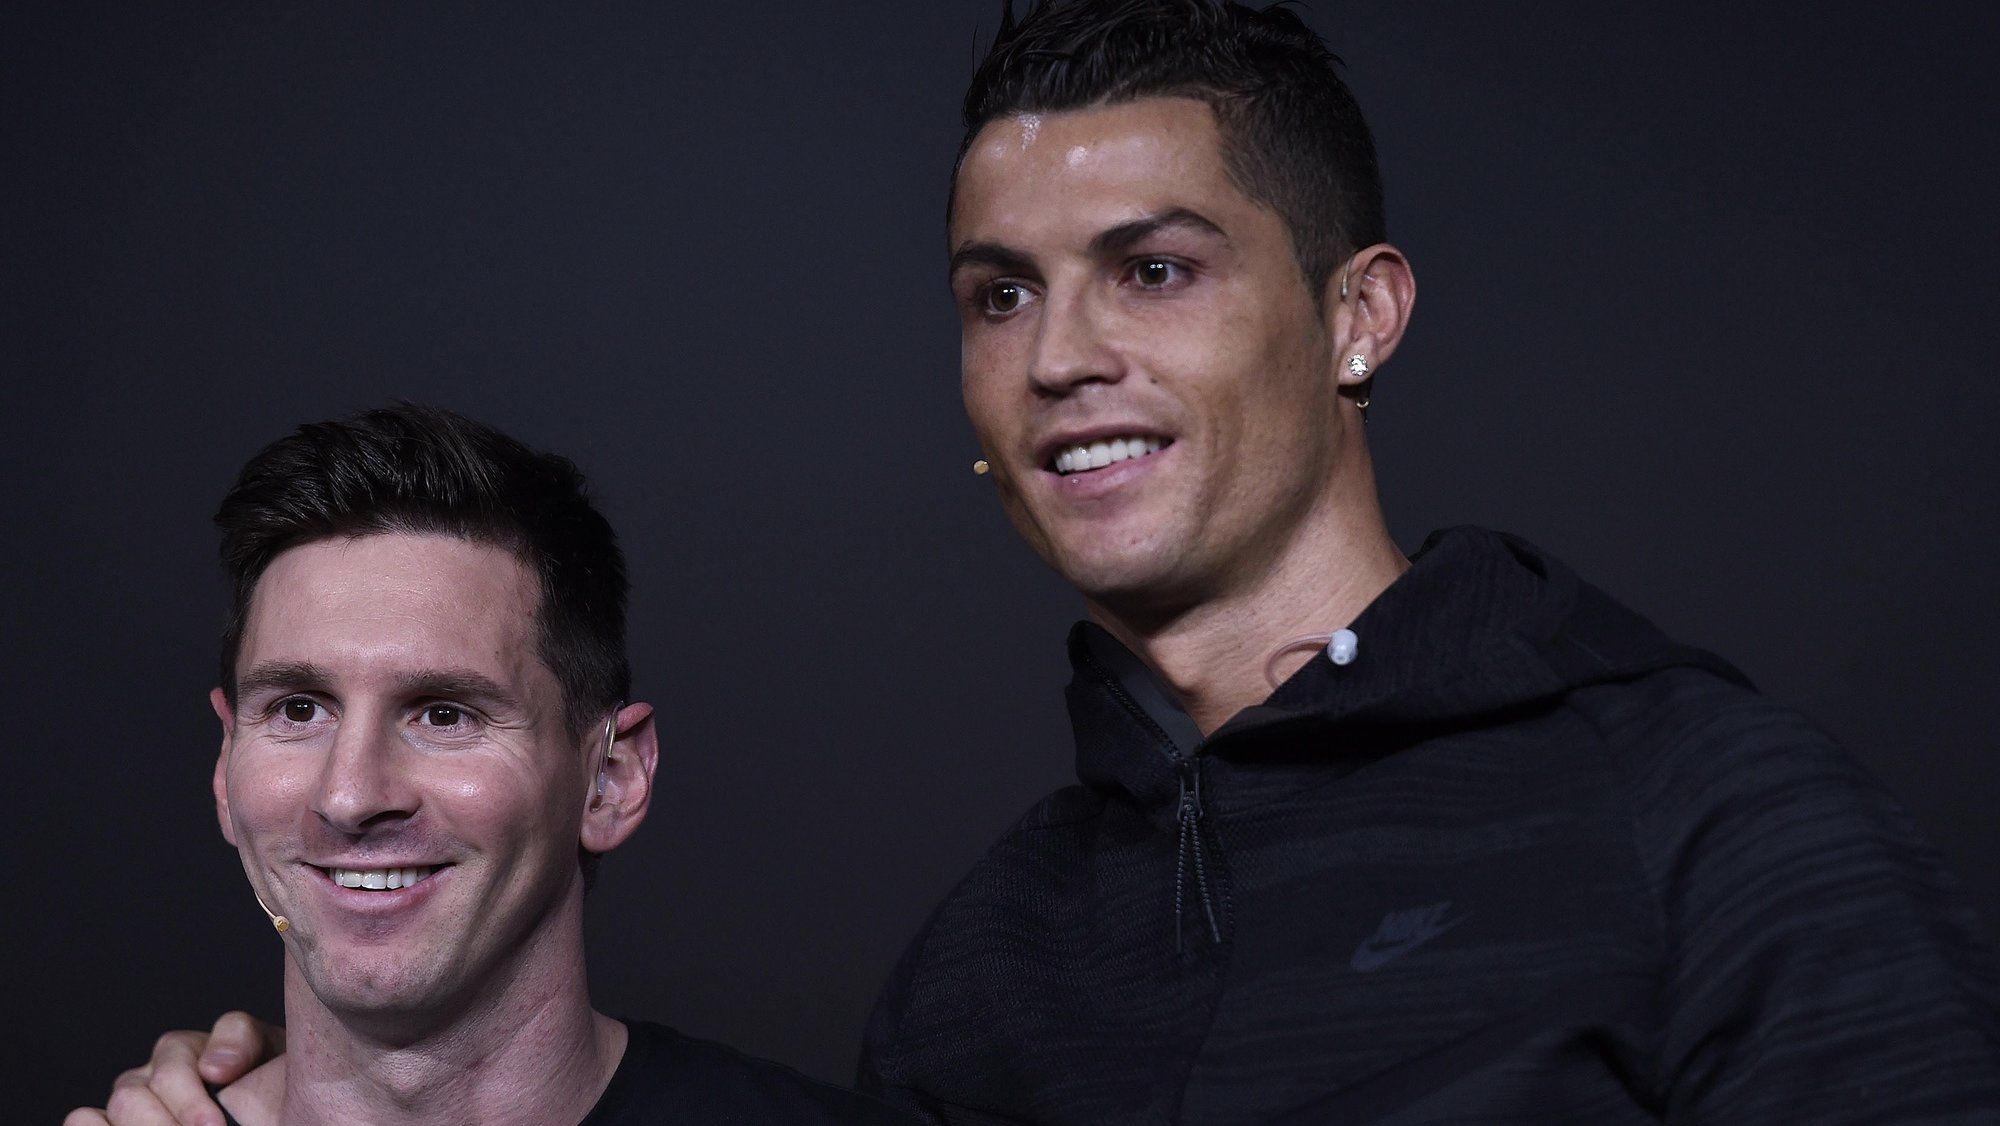 epa08890531 (FILE) Argentina&#039;s Lionel Messi (L) and Portugal&#039;s Cristiano Ronaldo, two of the nominees for the FIFA Ballon d&#039;Or 2015 award, attend a press conference prior to the FIFA Ballon d&#039;Or awarding ceremony at the Kongresshaus in Zurich, Switzerland, 11 January 2016 (re-issued on 17 December 2020). Polish striker Robert Lewandowski has been named The Best FIFA Men&#039;s Player during the virtual Best FIFA Football Awards 2020 on 17 December 2020, ahead of Argentina&#039;s Lionel Messi and Portugal&#039;s Cristiano Ronaldo.  EPA/VALERIANO DI DOMENICO *** Local Caption *** 52517239